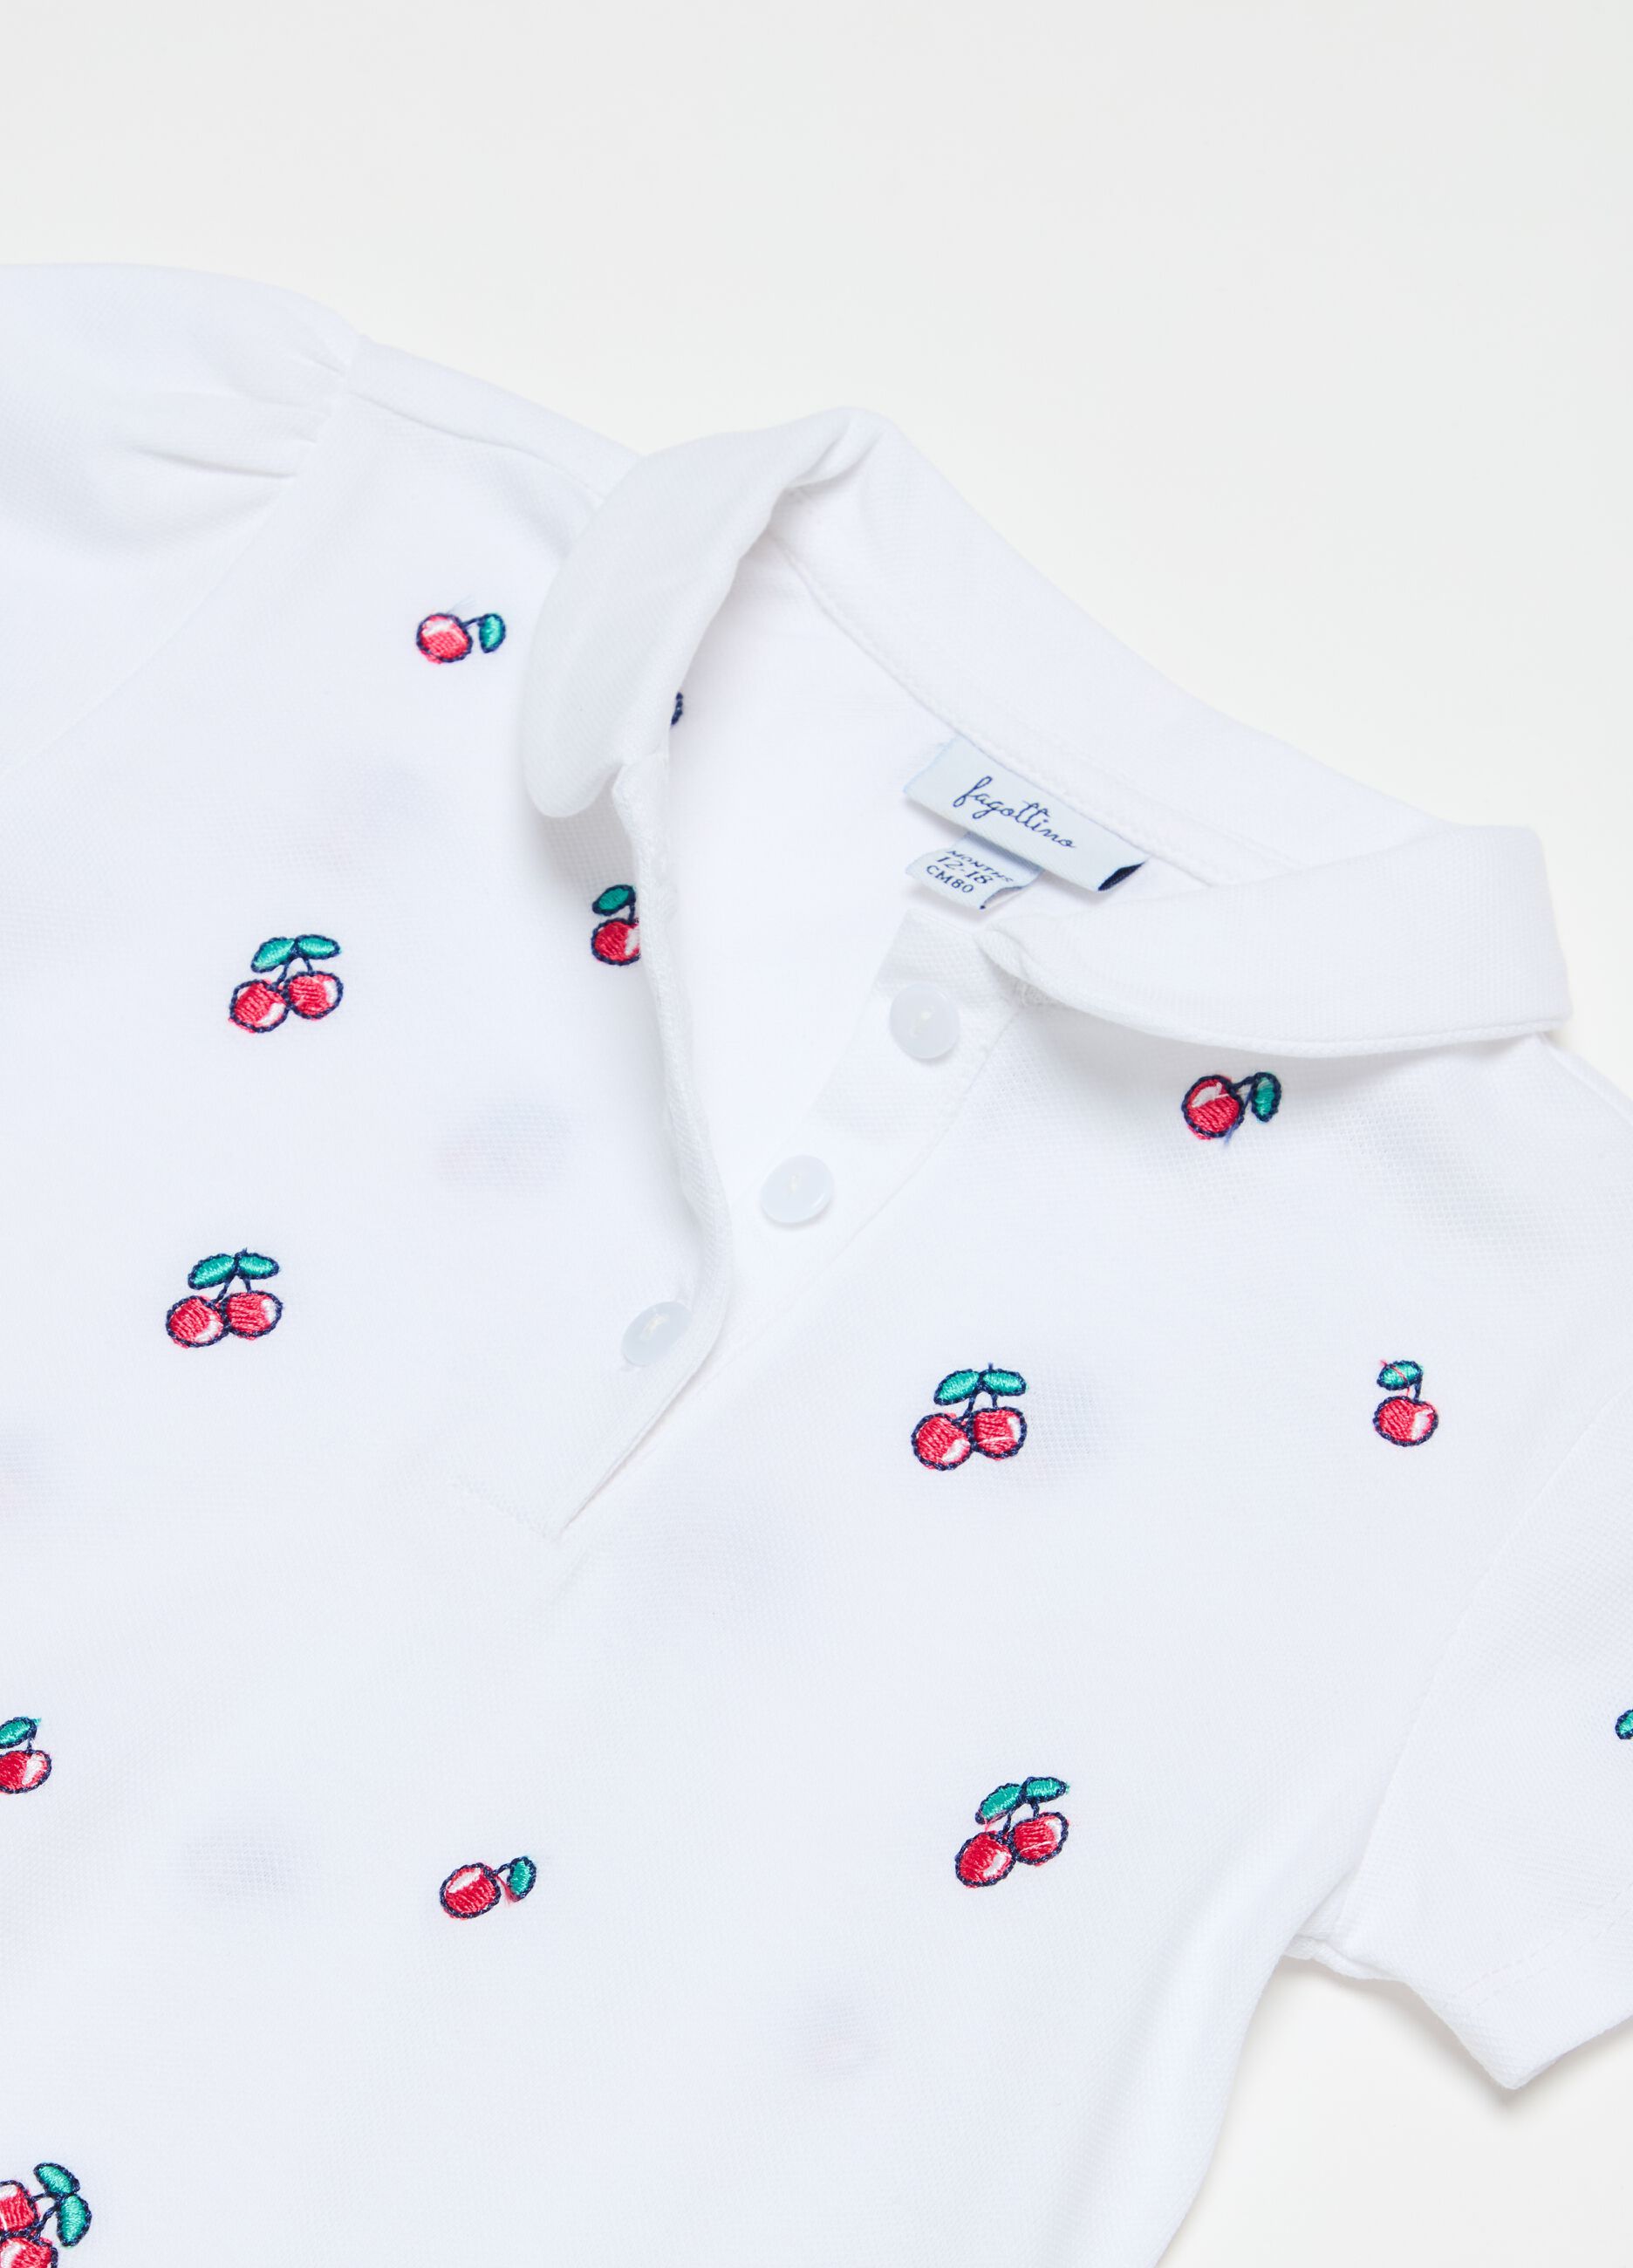 Pique polo shirt with embroidered cherries